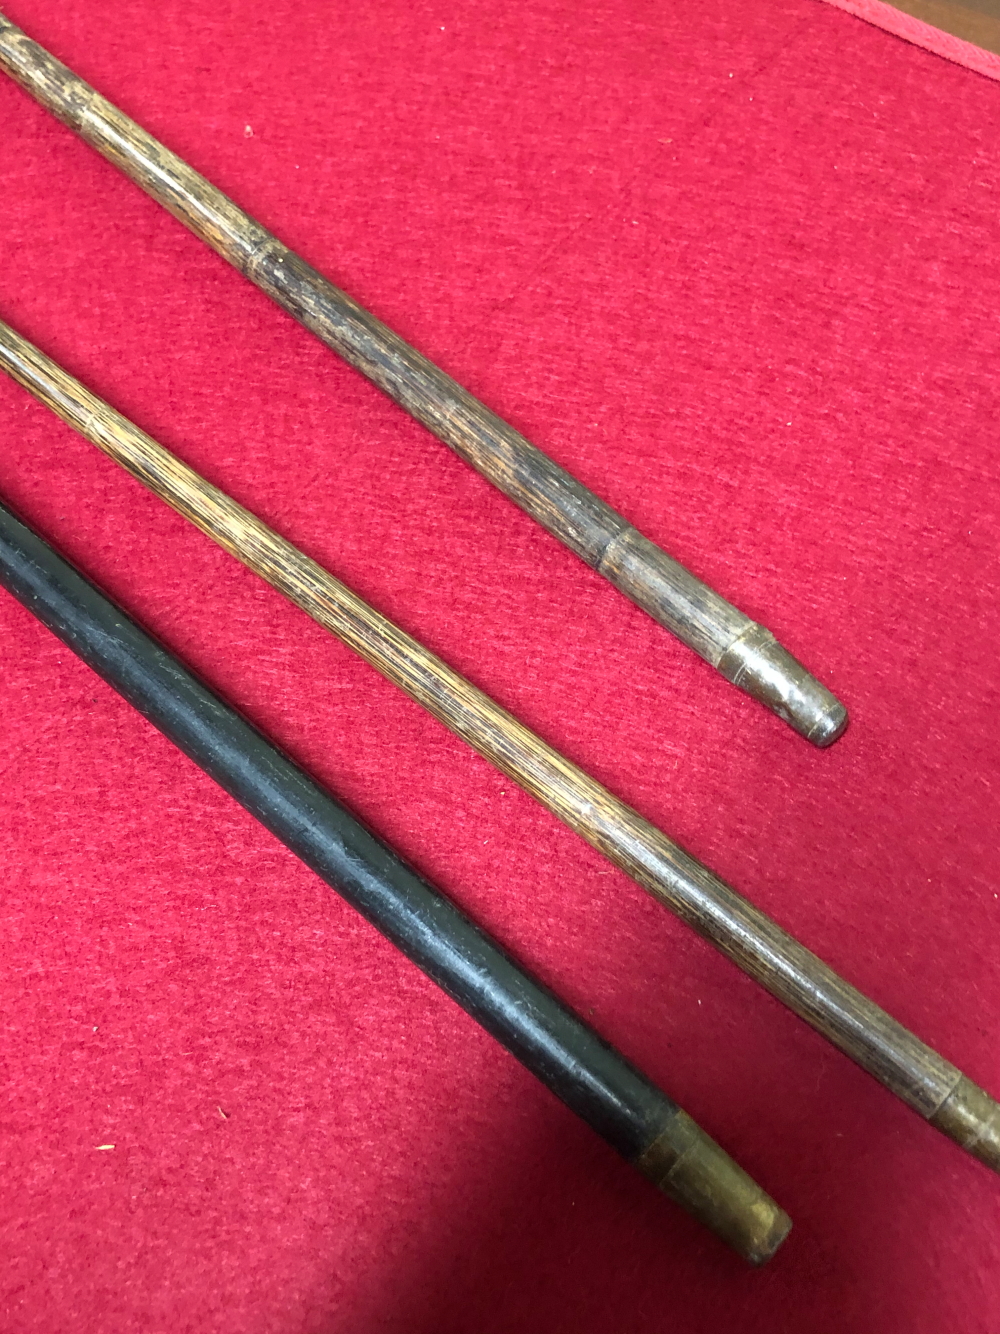 A SILVER TOPPED BLACK MALACCA WALKING CANE AND TWO BAMBOO WALKING STICKS WITH WHITE METAL MOUNTS - Image 17 of 20